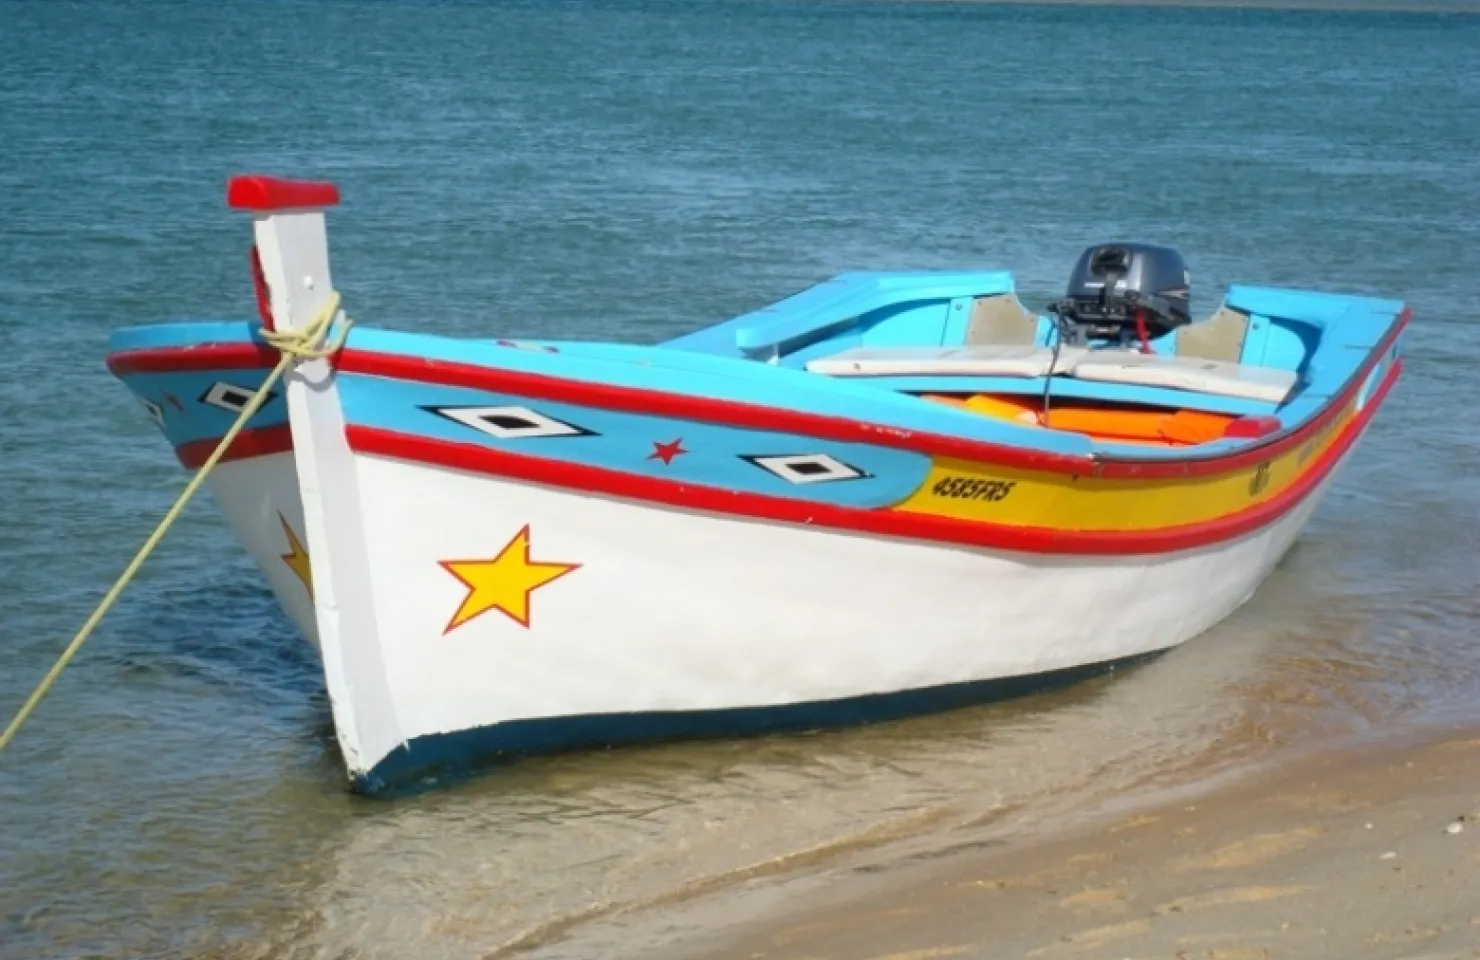 Traditional Boat Trip on The Ria Formosa - Albufeira Boat Trips